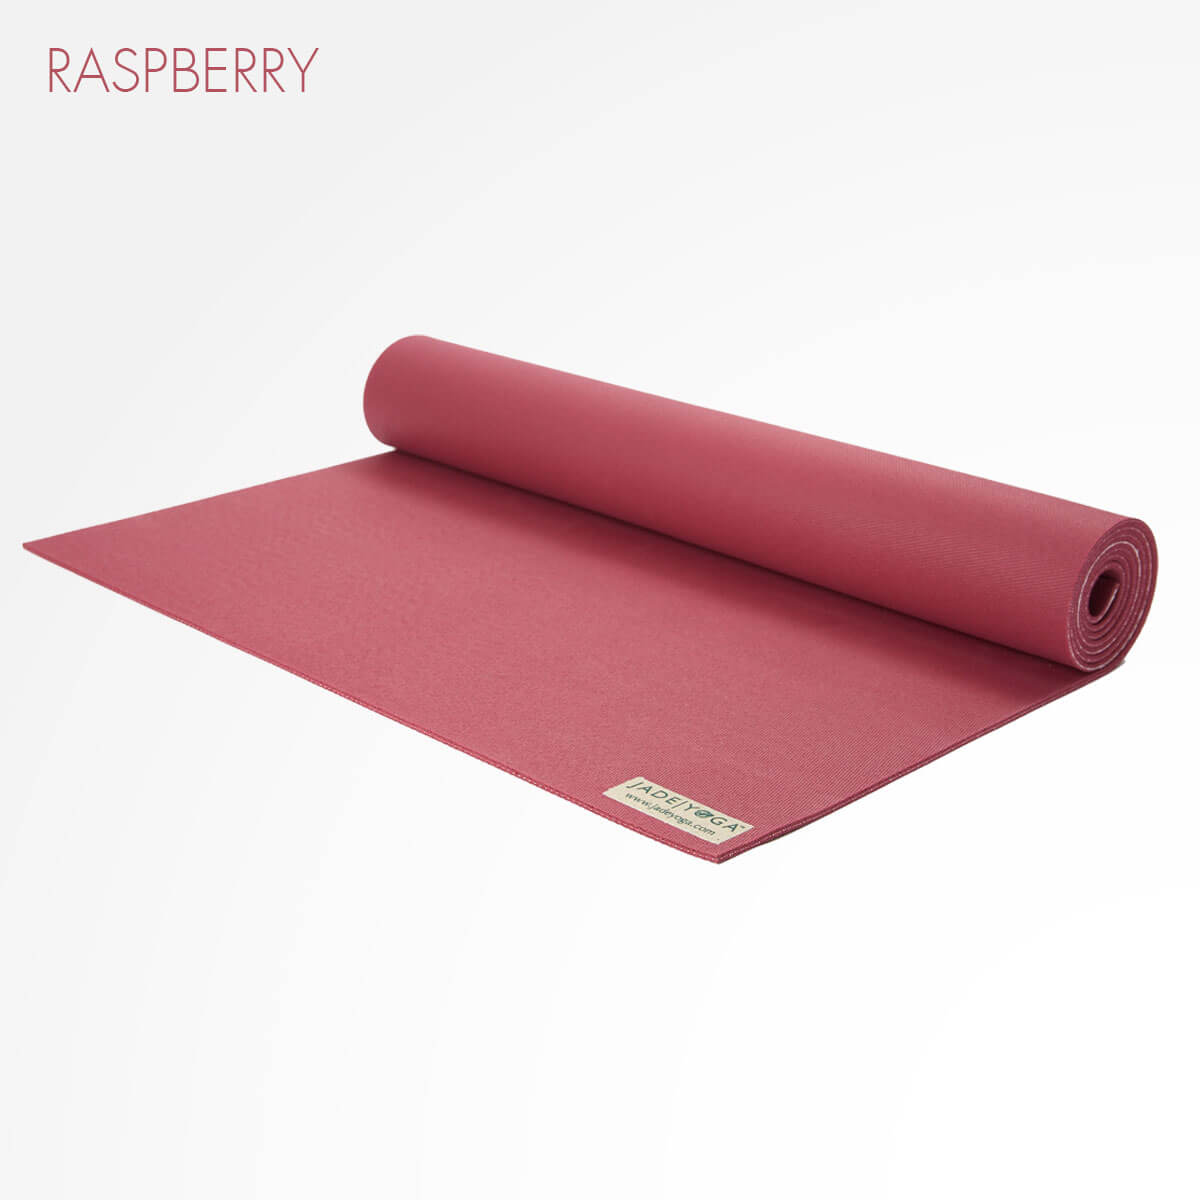 Superior Skillful Hot Yoga Exercise Towel Mats with Non Slip